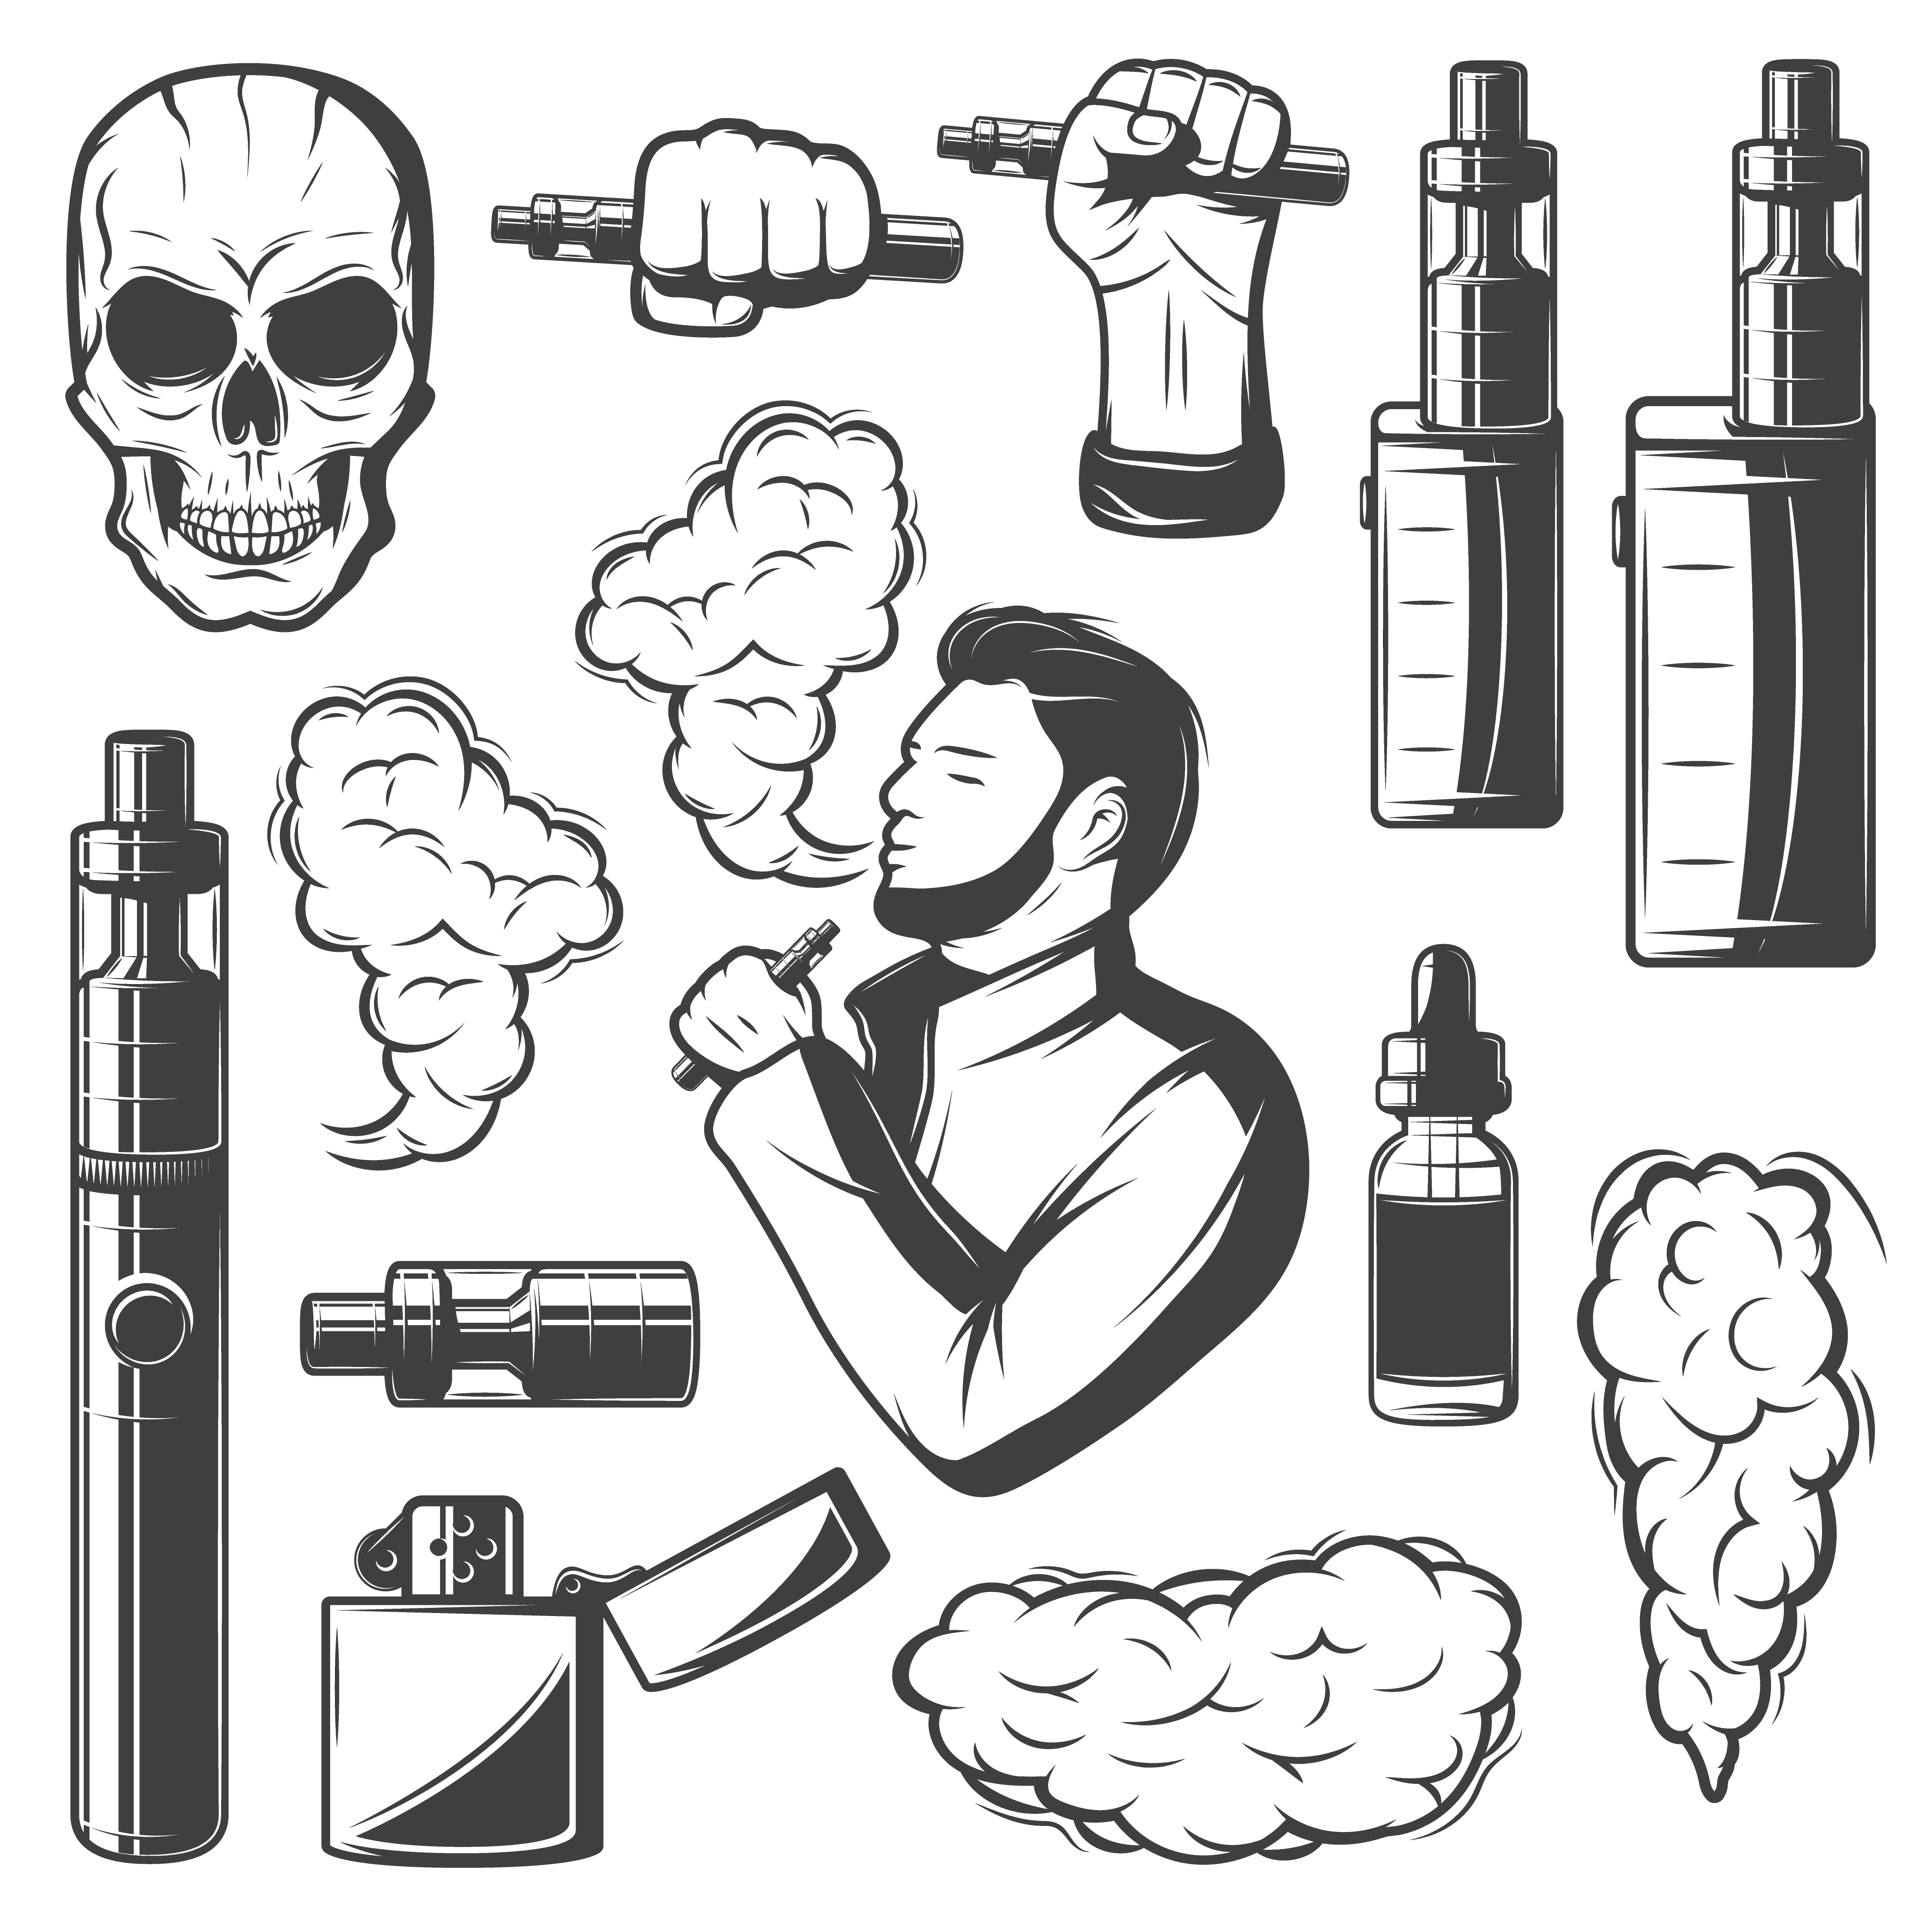 Vape elements collection with electronic cigarettes smoke skull bottle vaporizers and smoking man isolated vector illustration